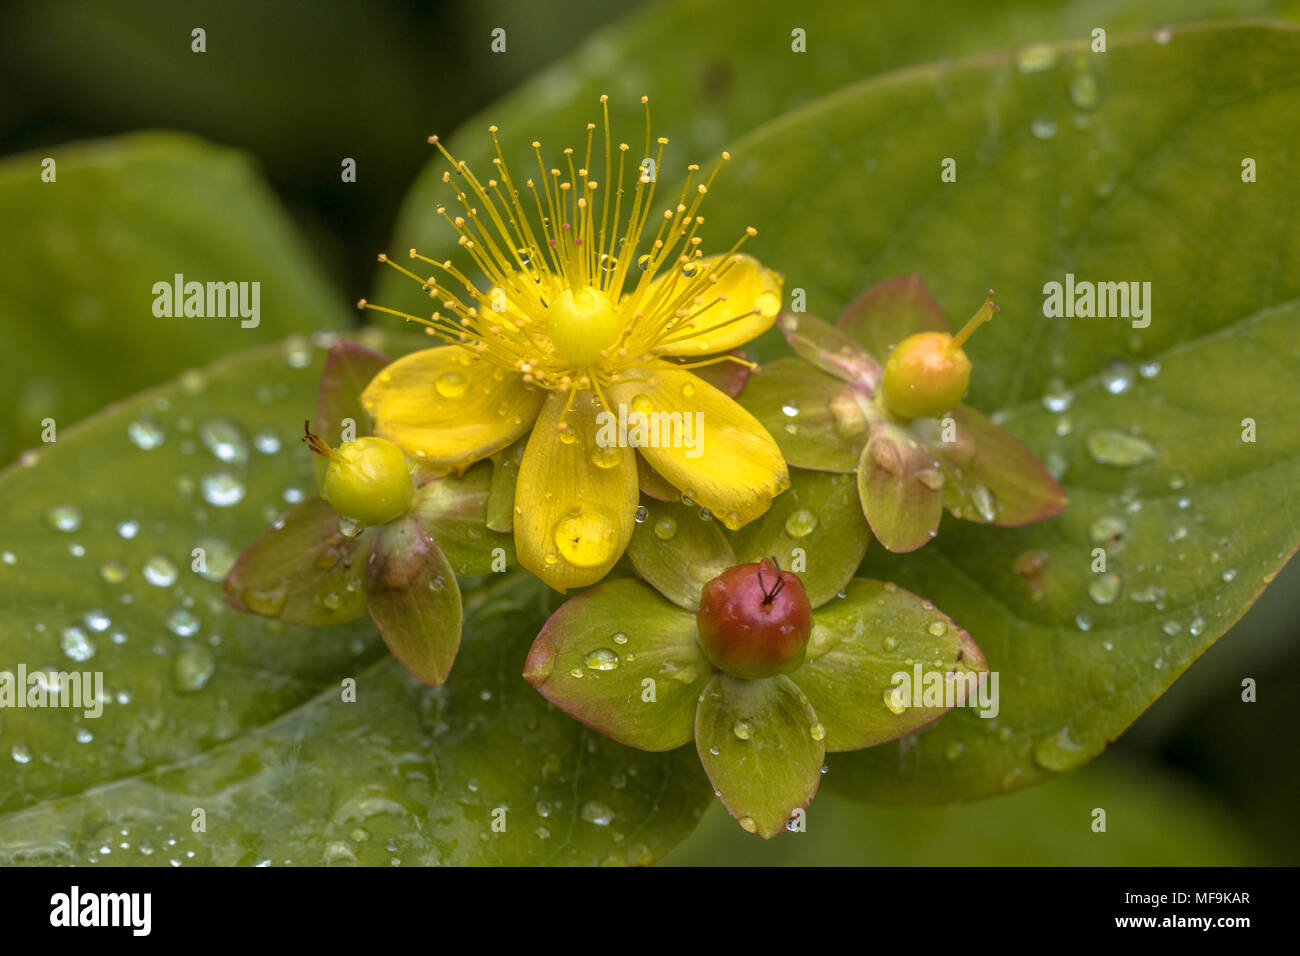 Yellow Hypericum flower with seed capsule and dew drops Stock Photo